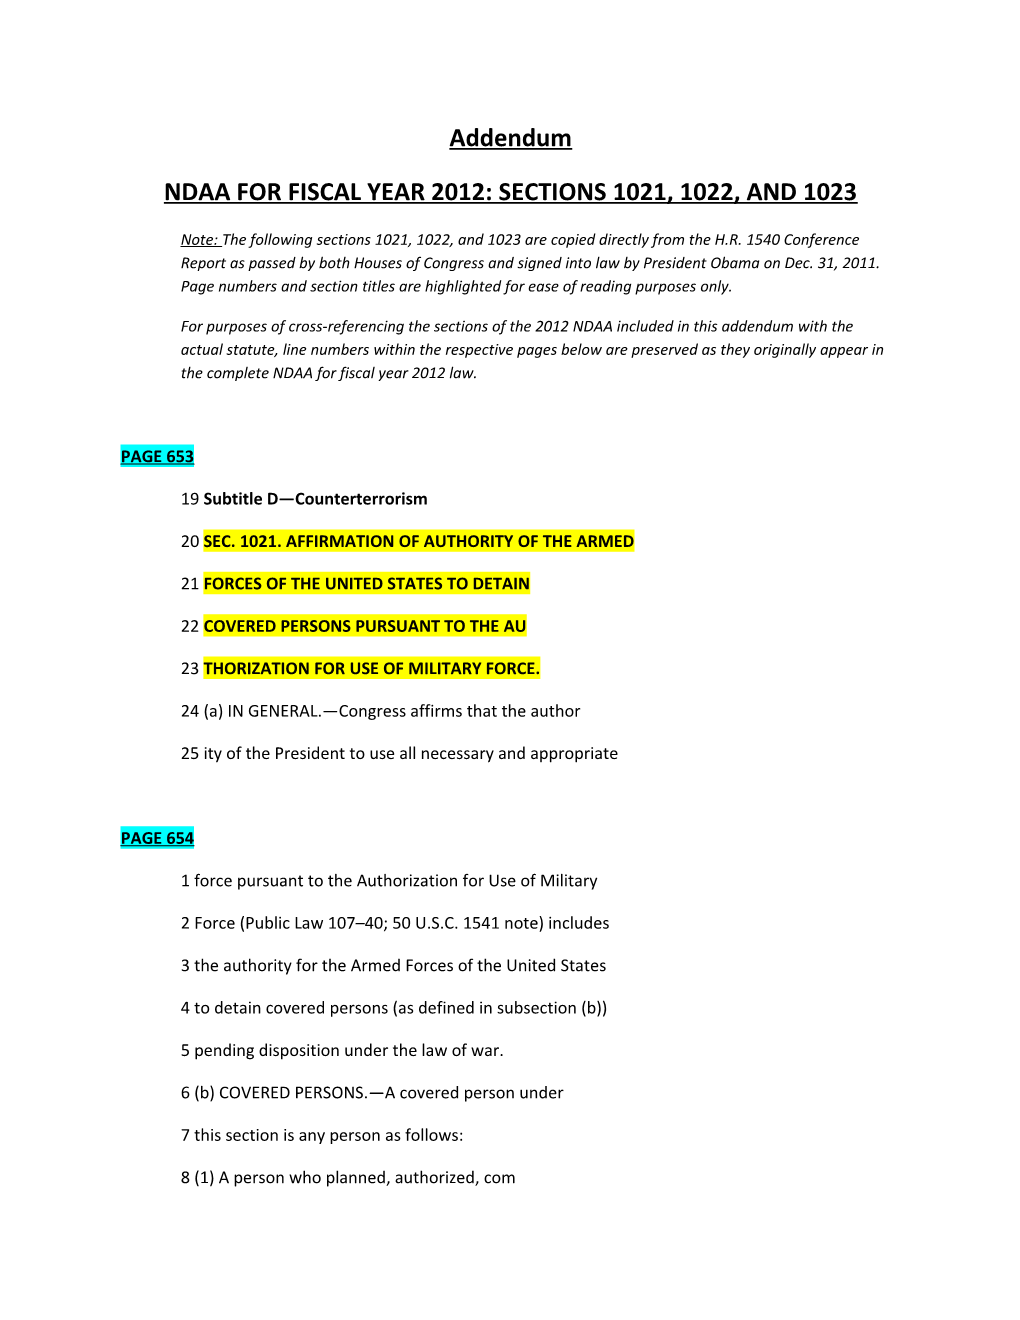 Ndaa for Fiscal Year 2012: Sections 1021, 1022, and 1023